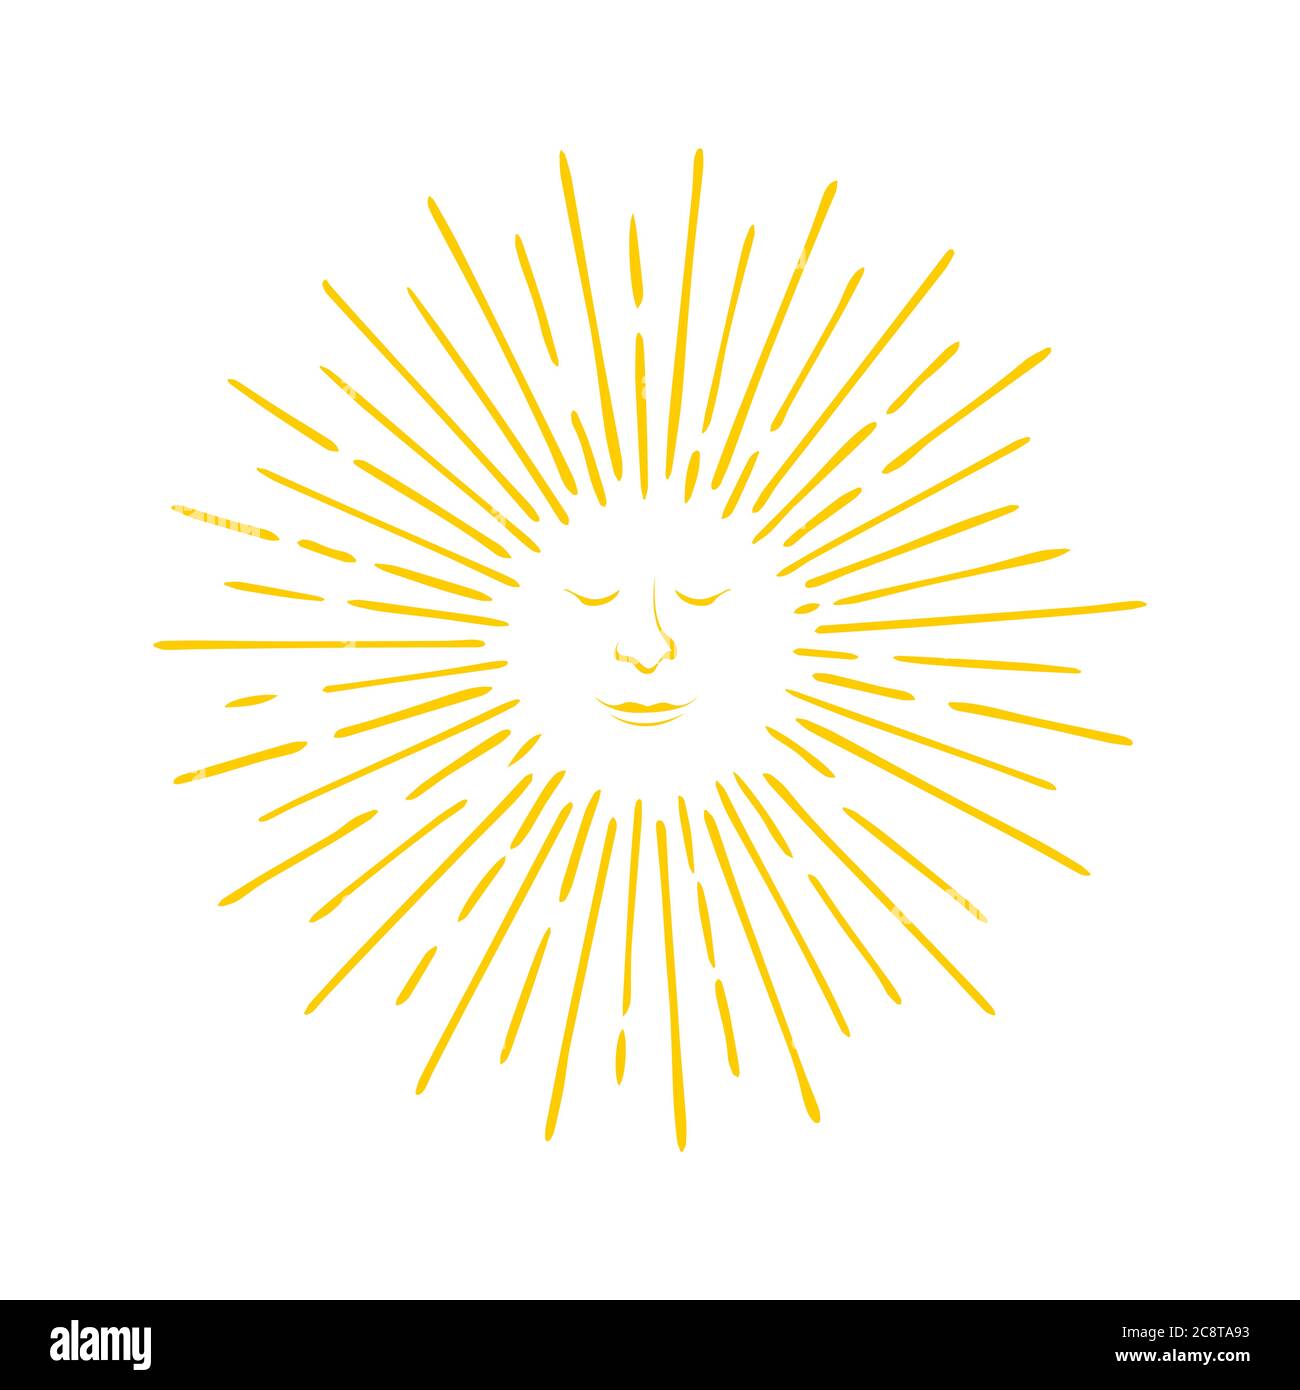 bright sun logo vector with smile relaxing face icon in meditation style theme illustrations Stock Vector